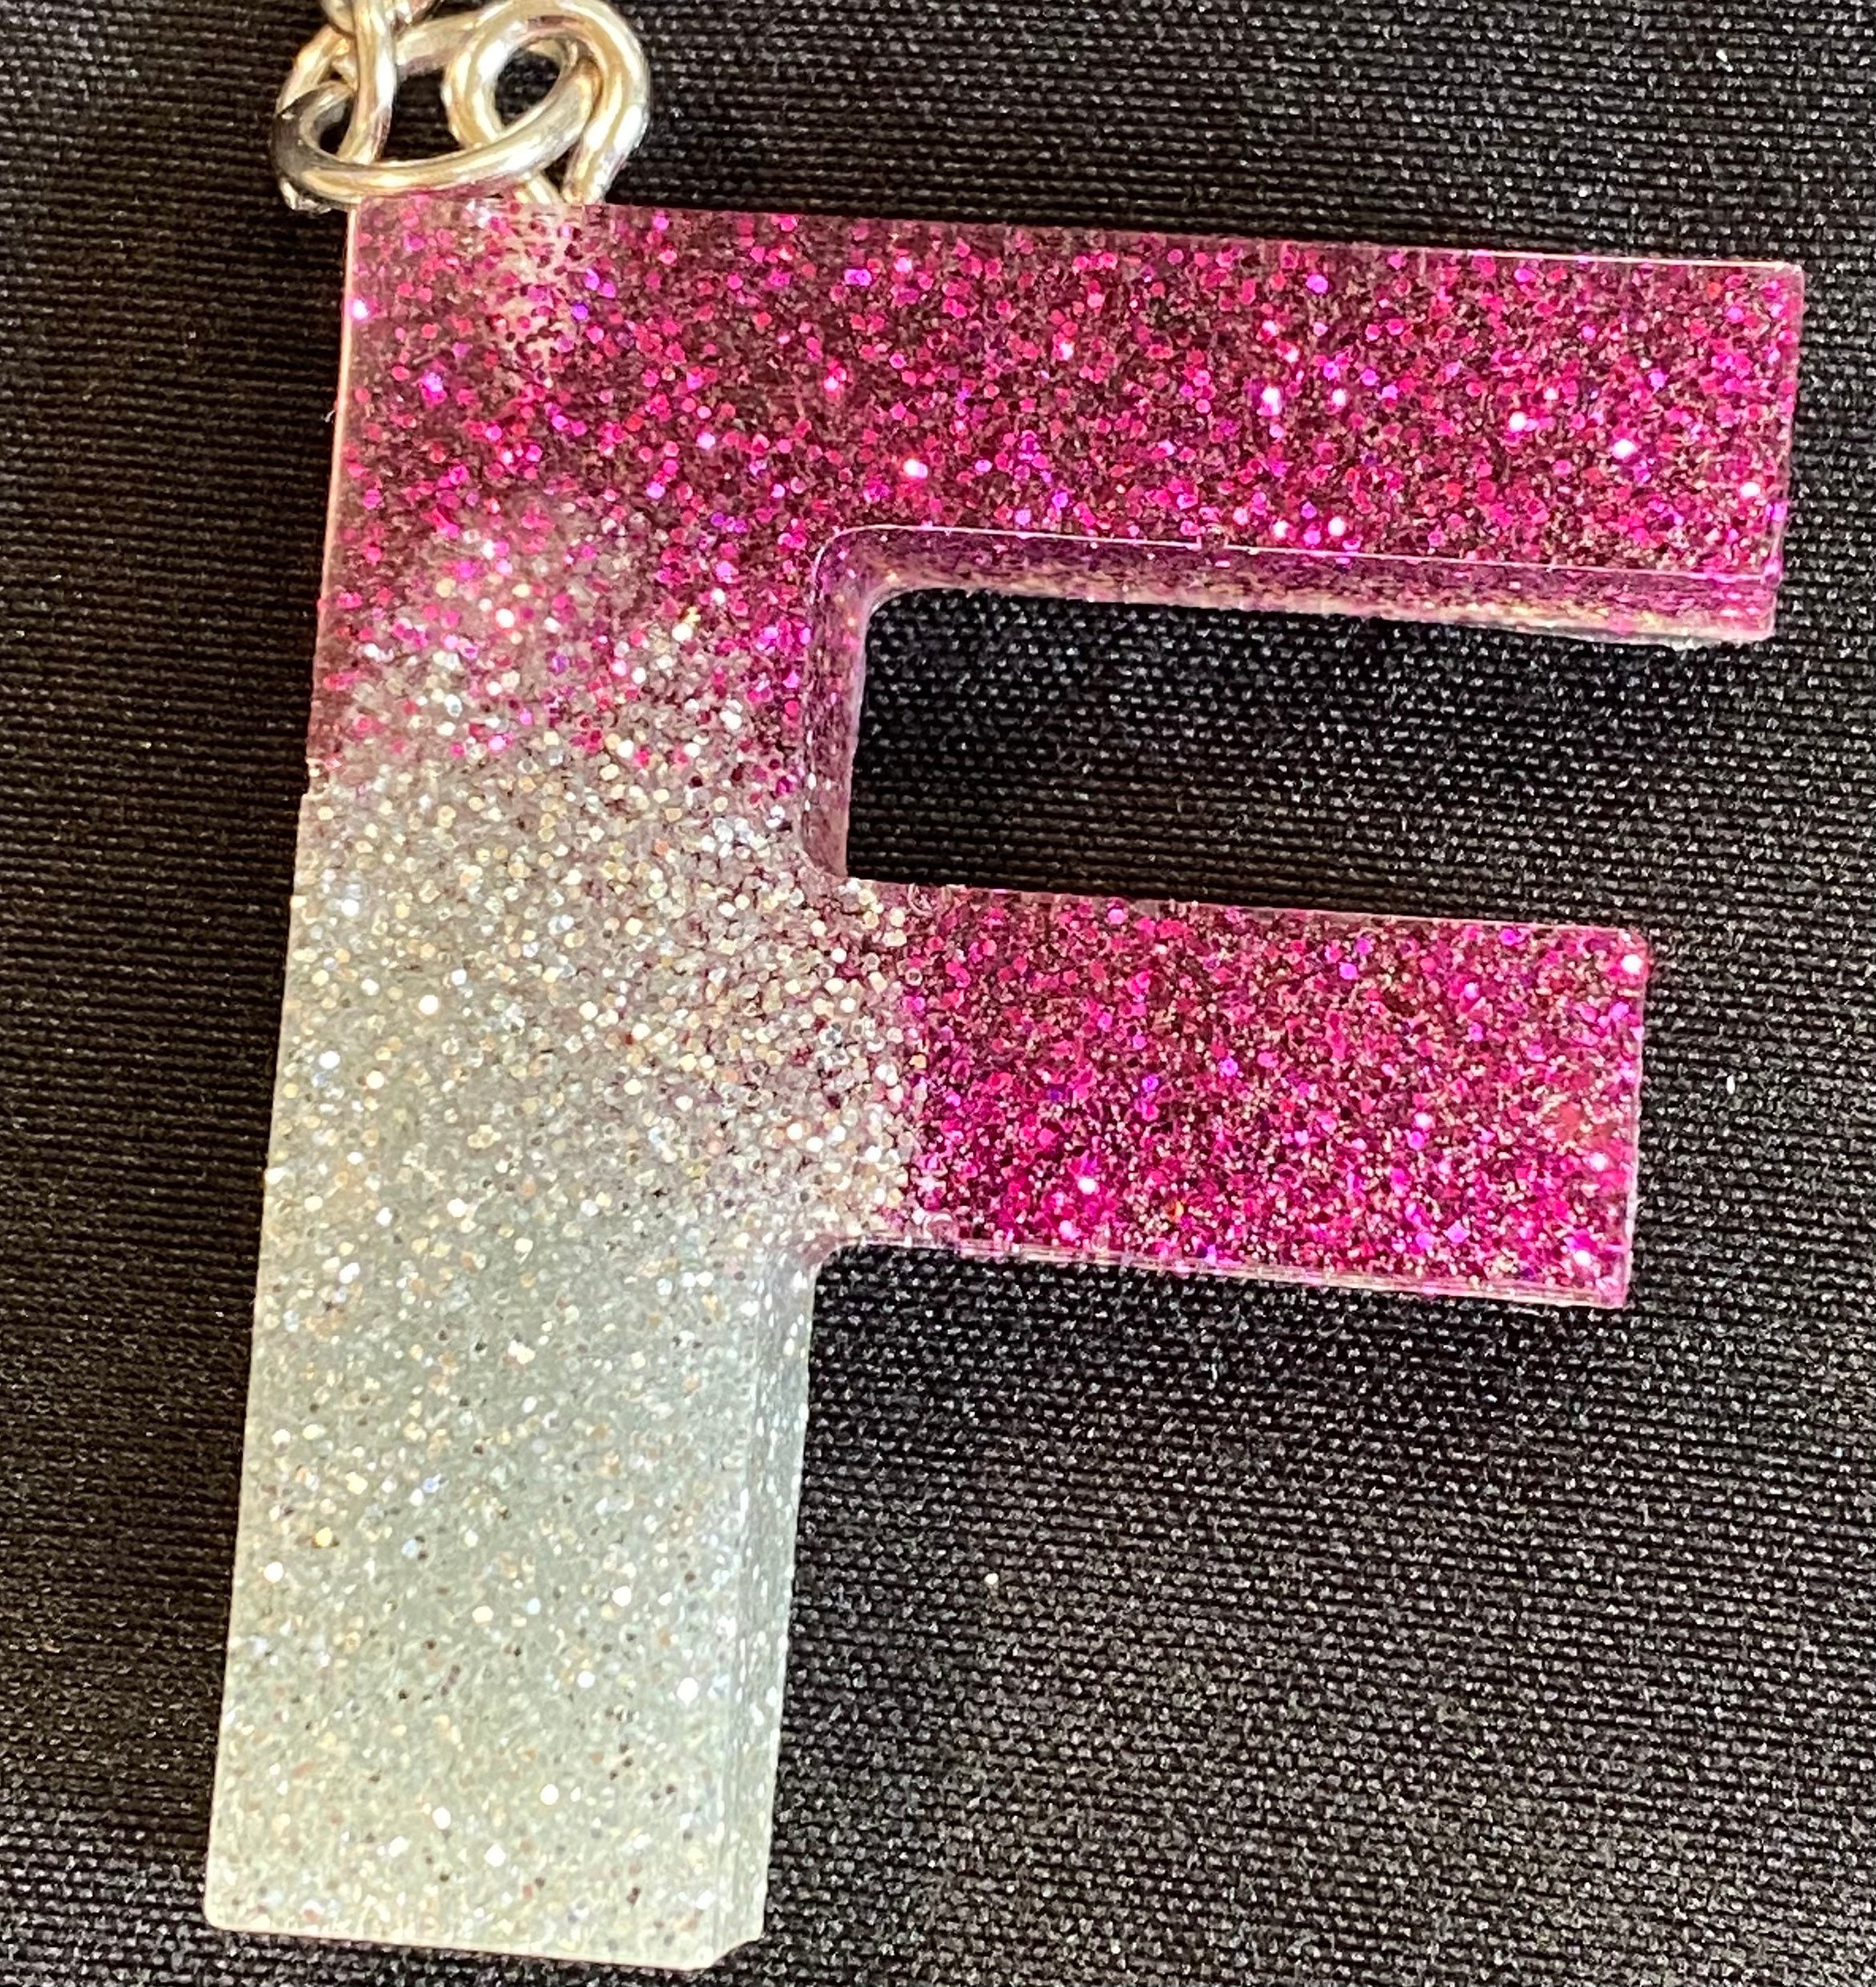 Glitter Initial Resin Keychain with Tassel - Pink and Gold – Shop Exclusive  Picks